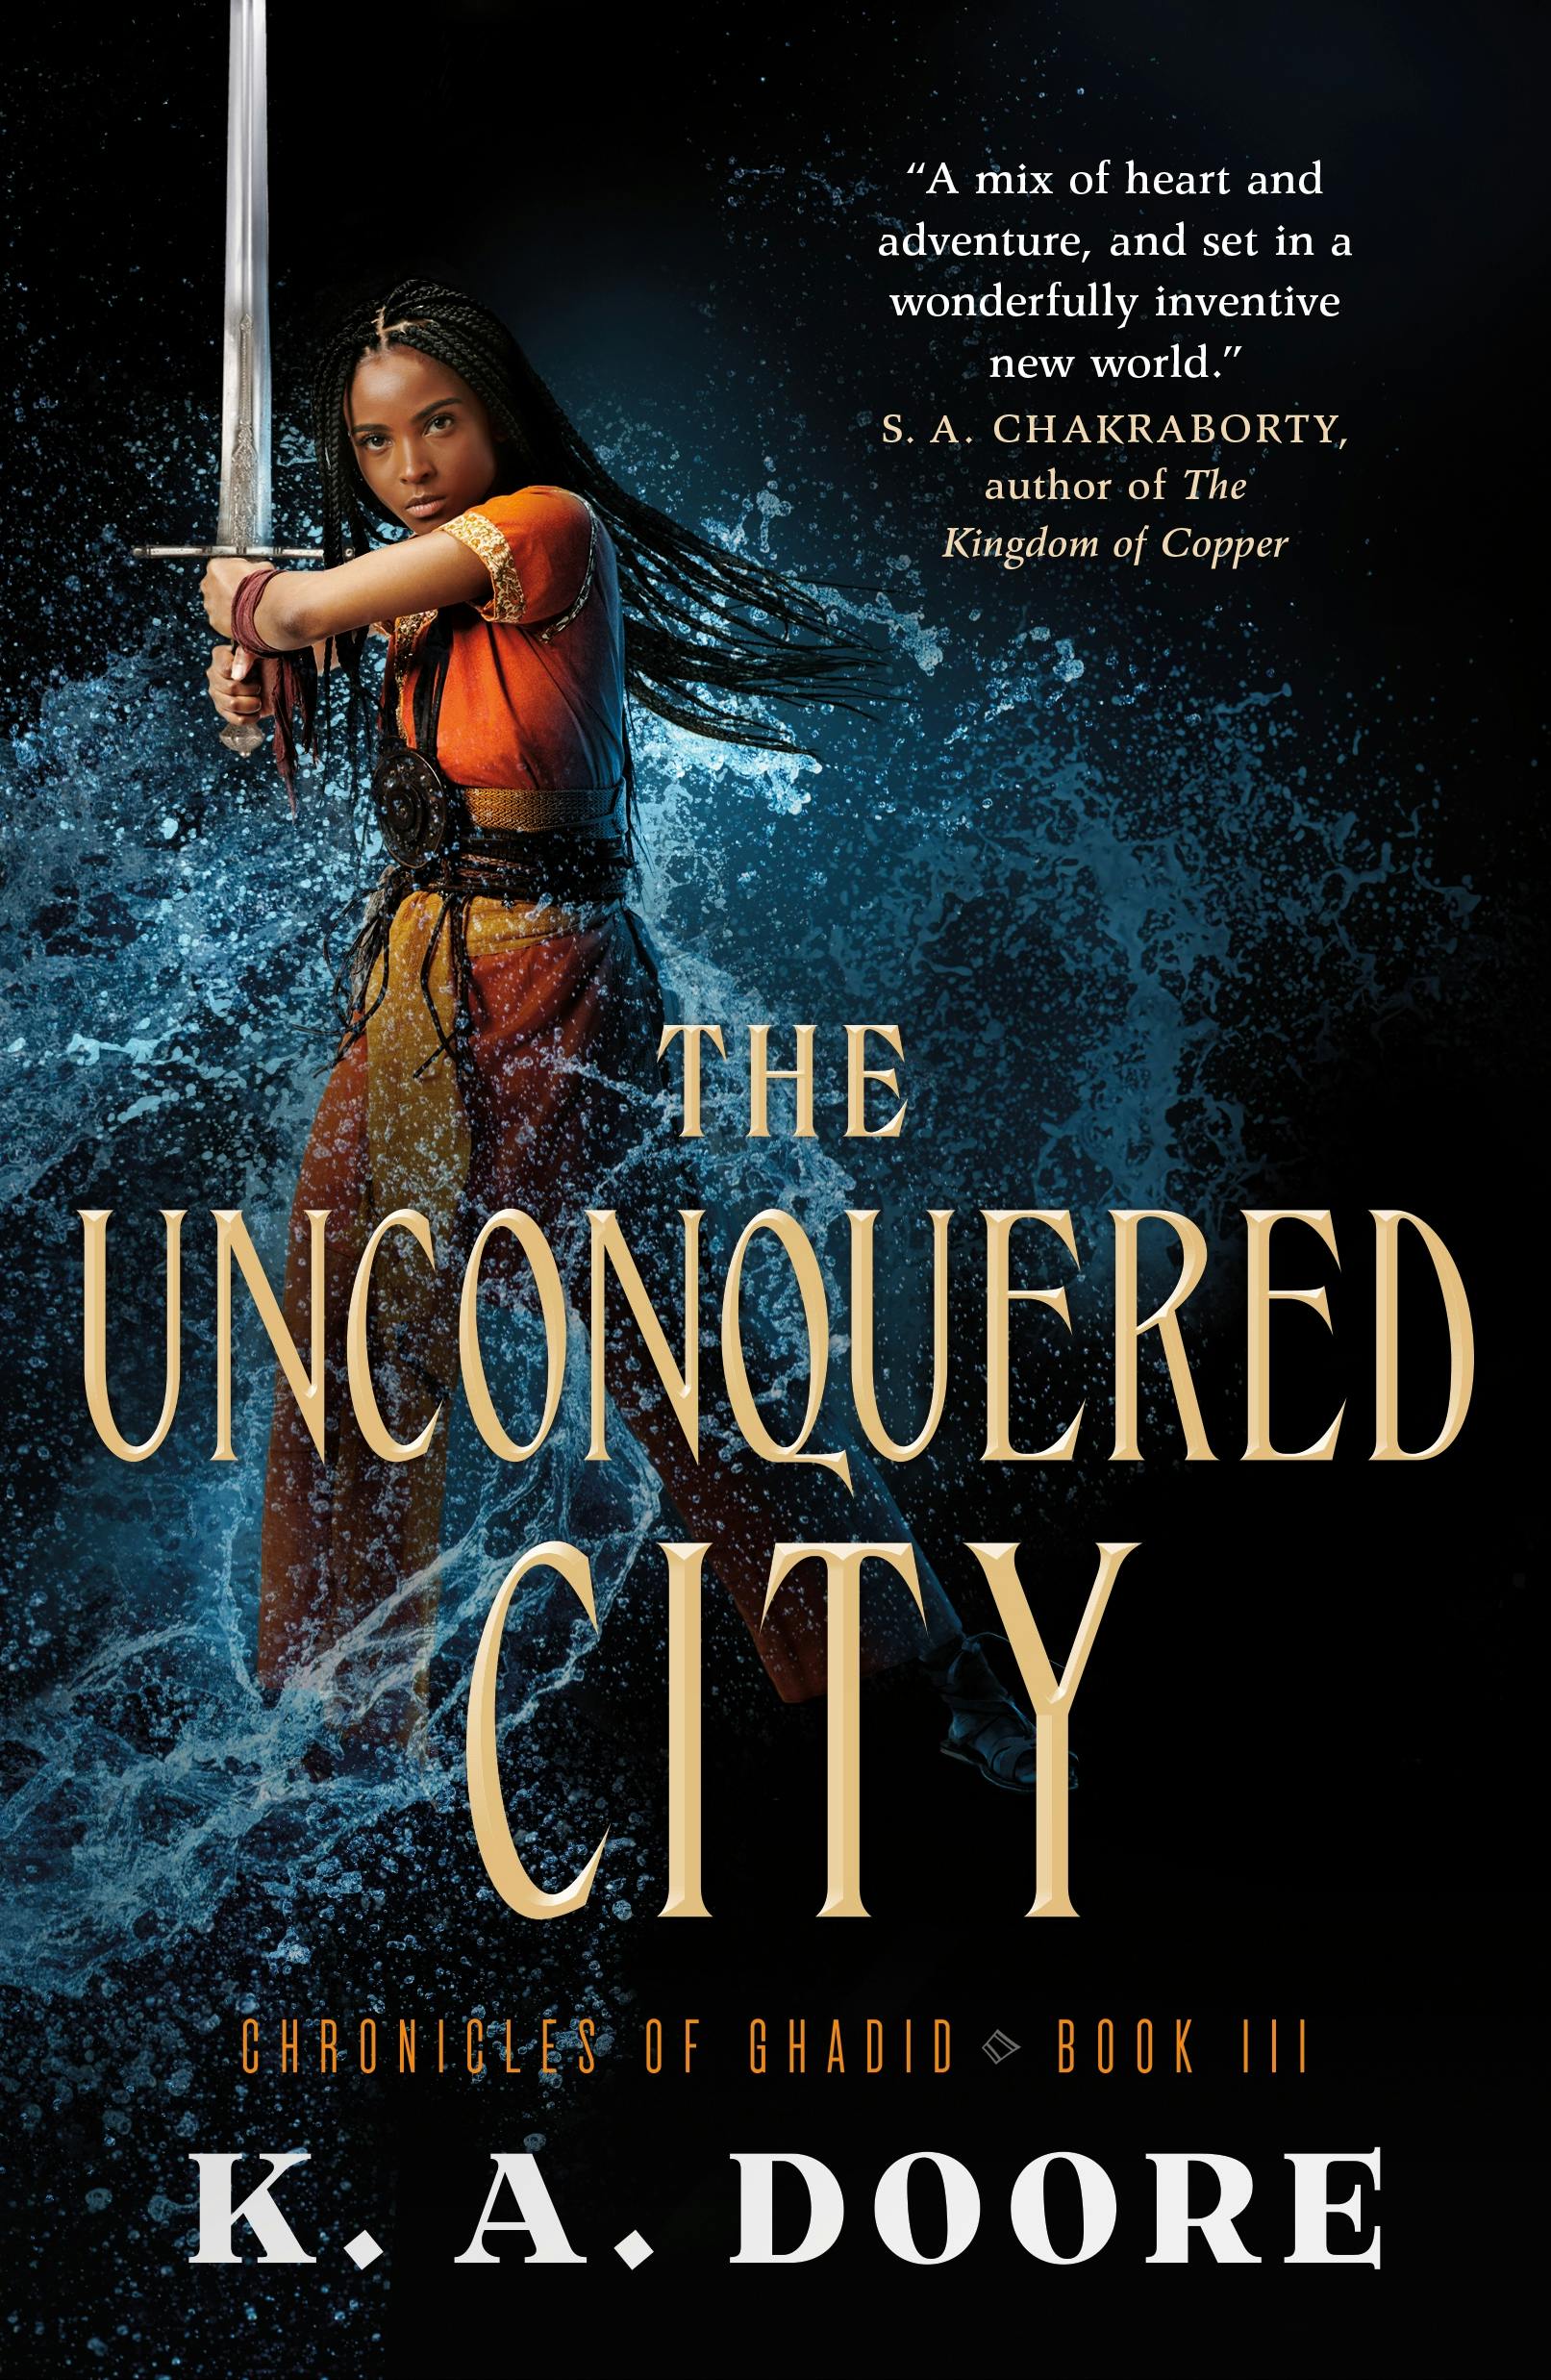 Image of The Unconquered City